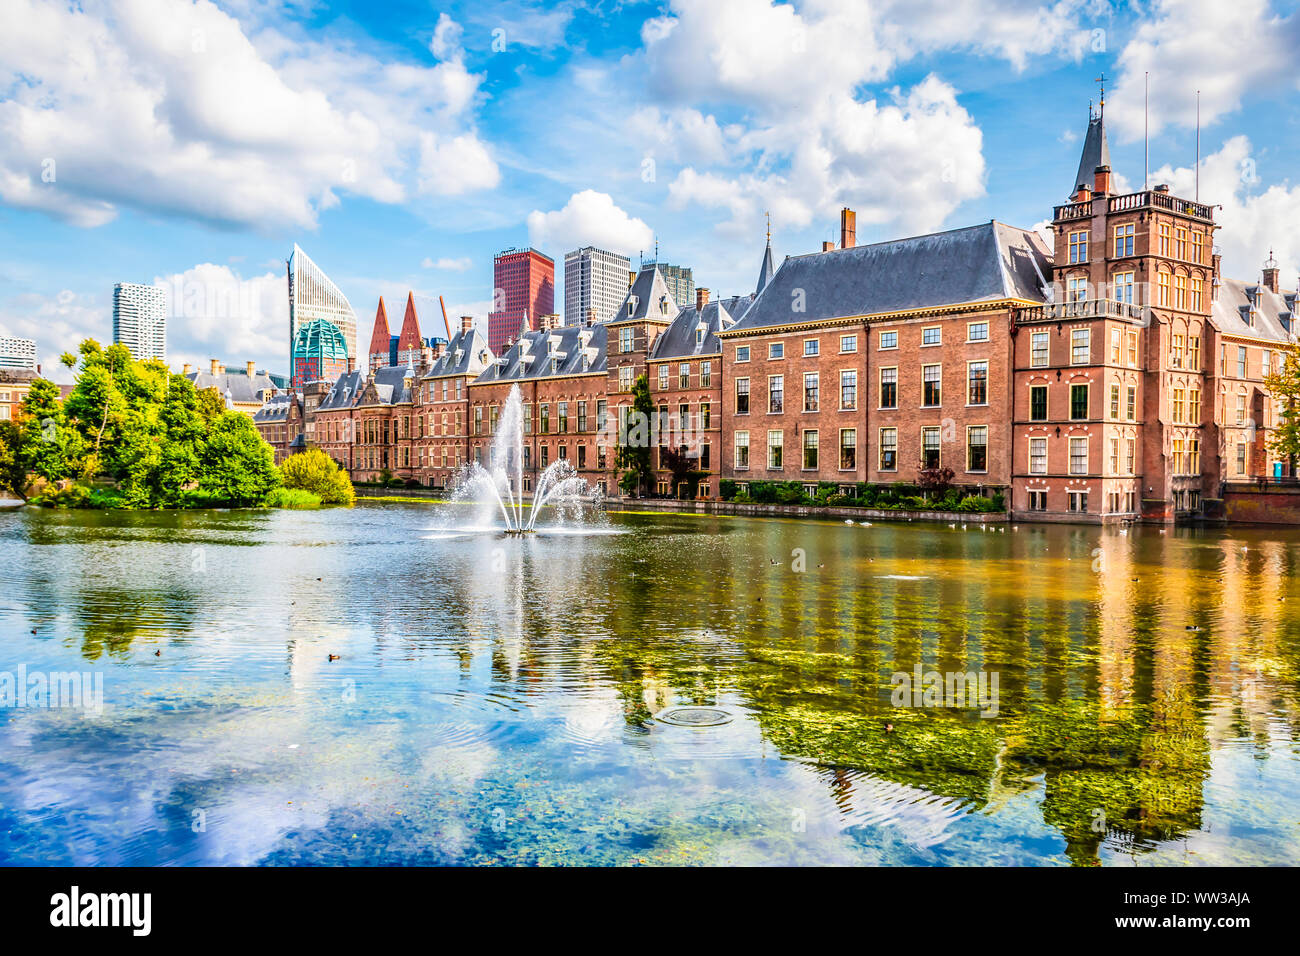 Dutch parliament of The Hague, The Netherlands. Stock Photo